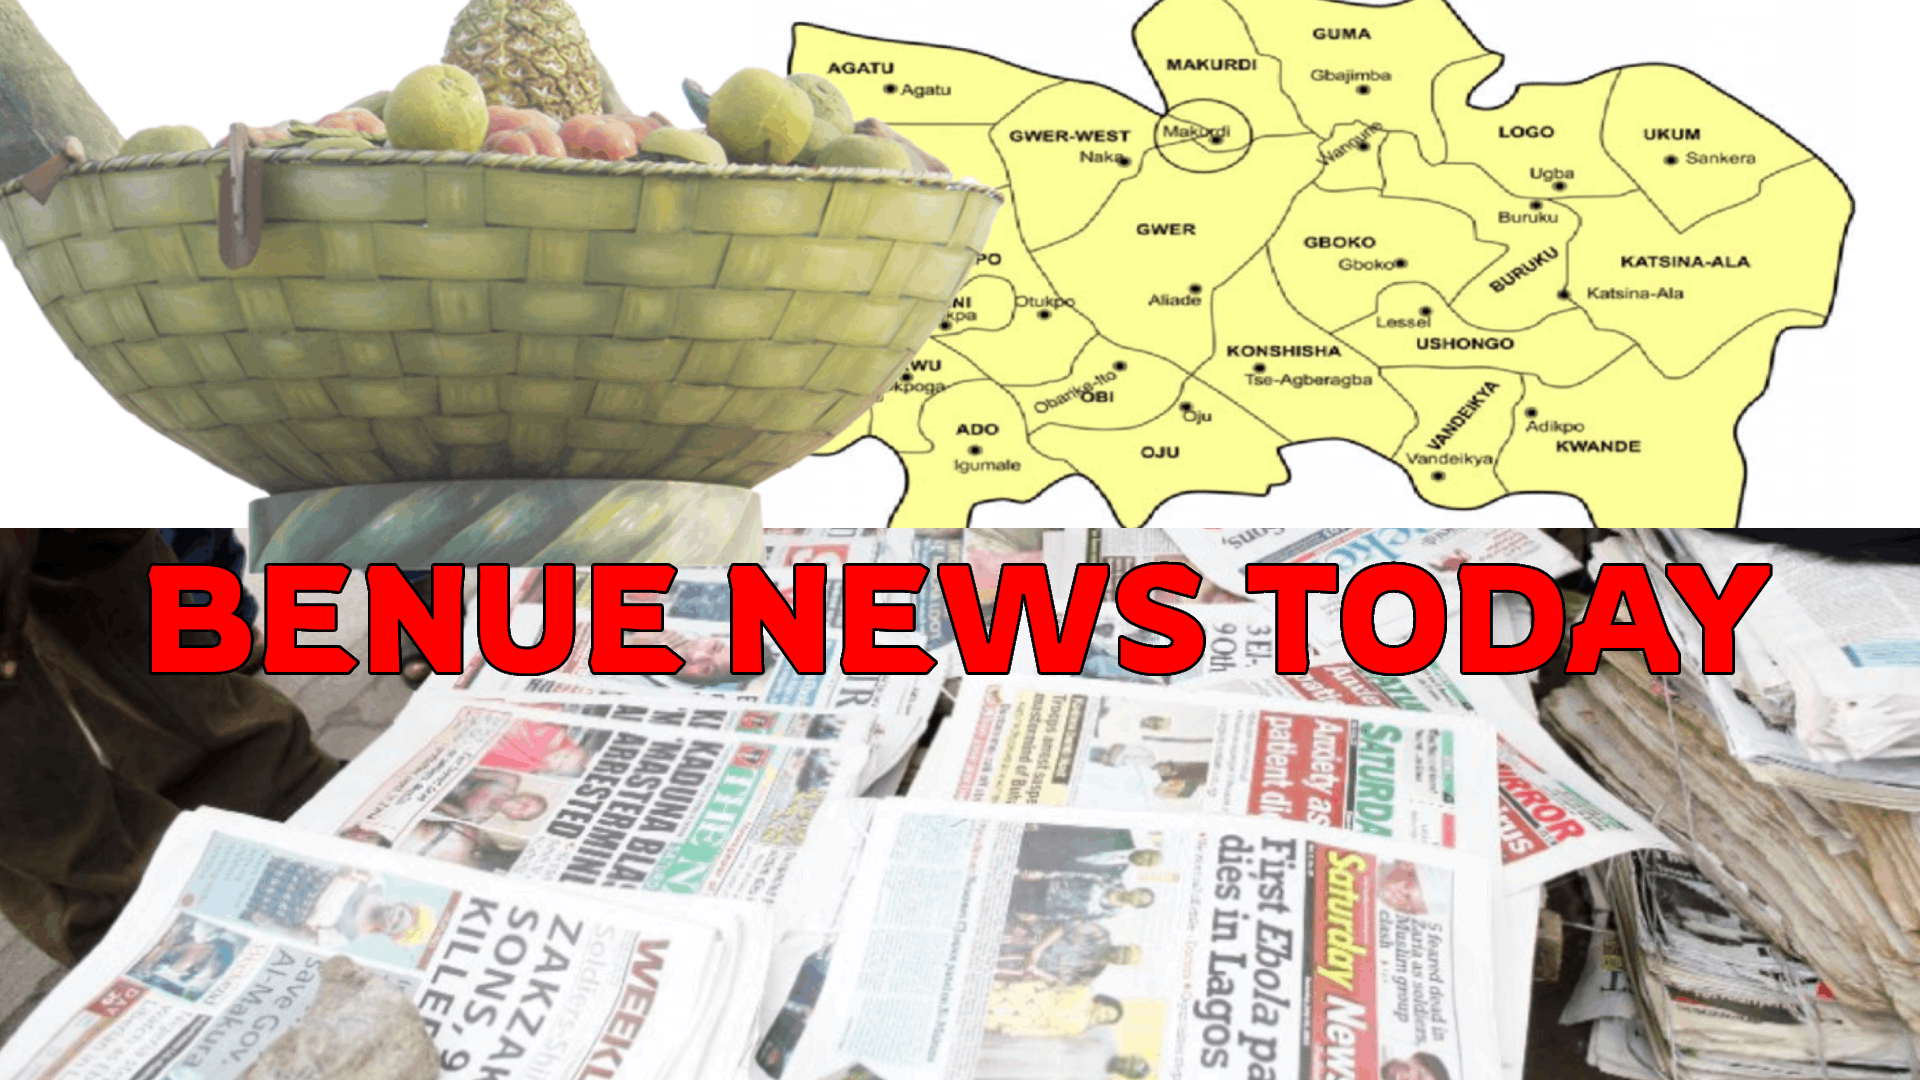 Latest Benue News today, Thursday, August 4 2022